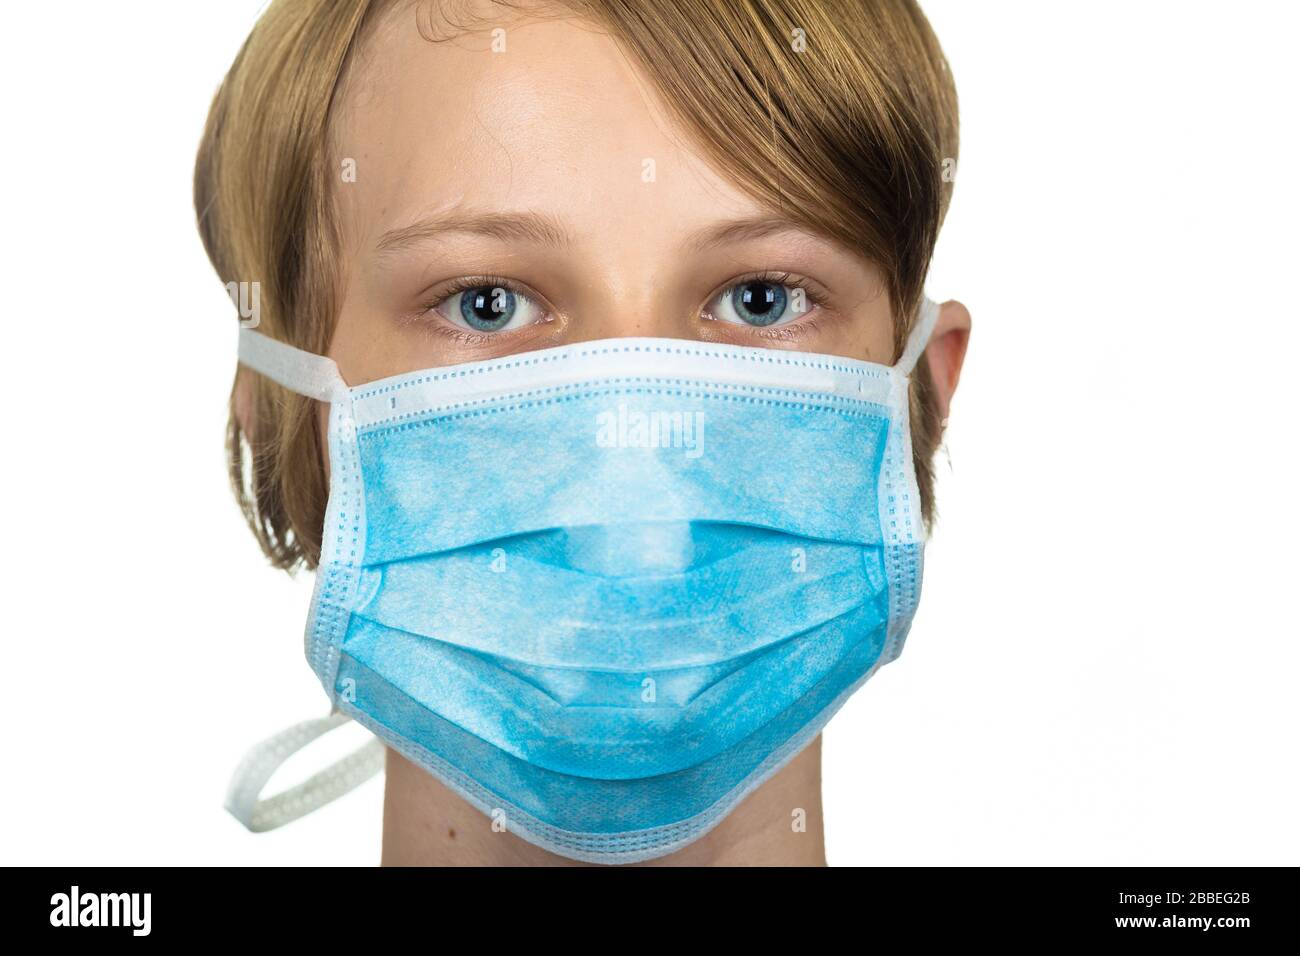 Young teenage boy wearing a protective mask to protect against virus infection.  Isolated on white. Stock Photo